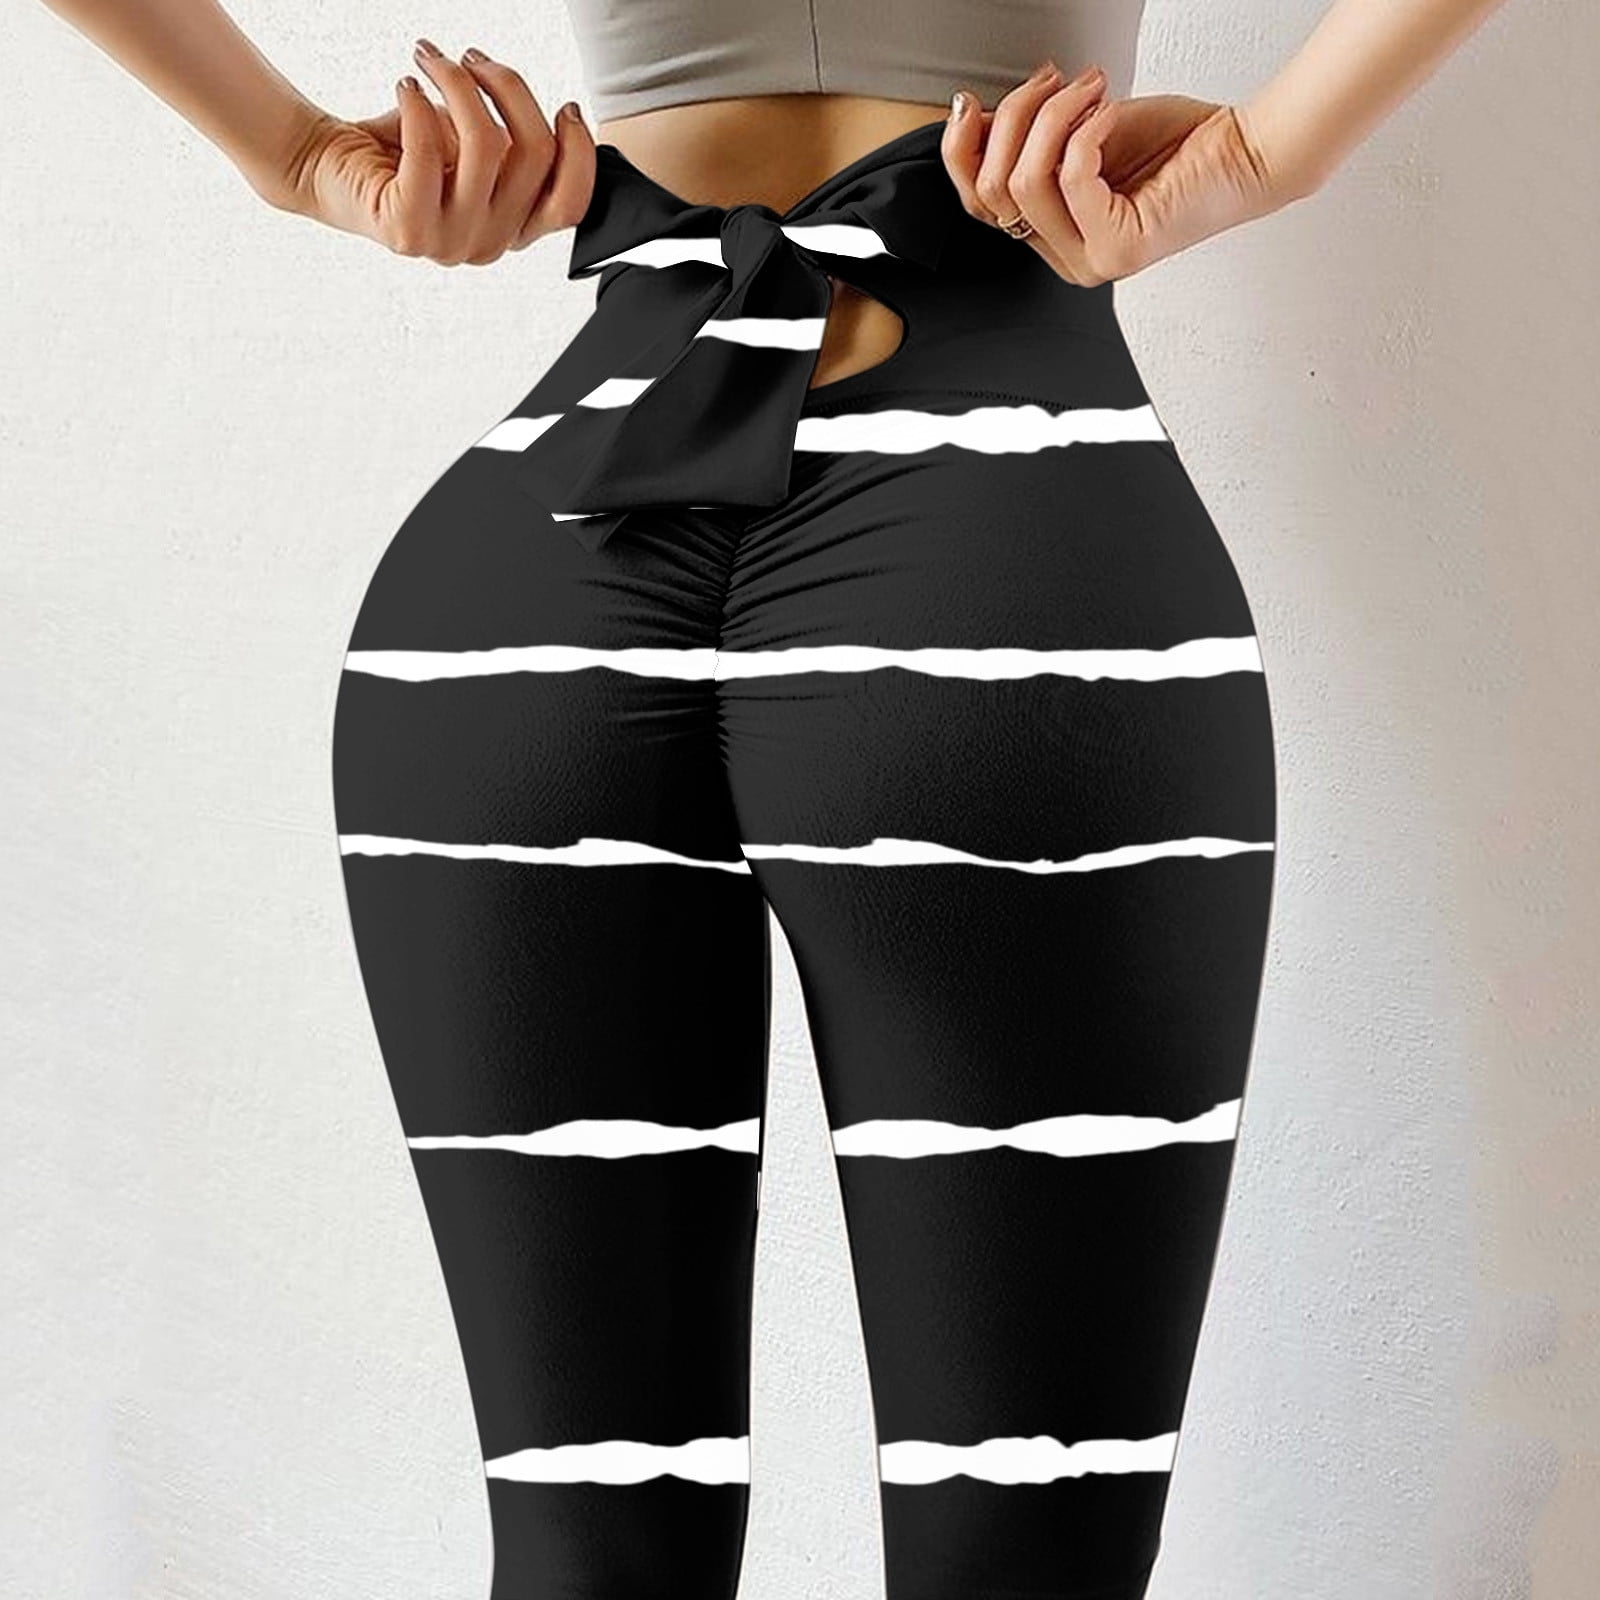 EQWLJWE Yoga Pants for Women Workout Leggings for Women High Waist Tummy  Control Camo Running Yoga Pants Butt Lifting Sexy Stretchy  Tights,Deals,Clearance 